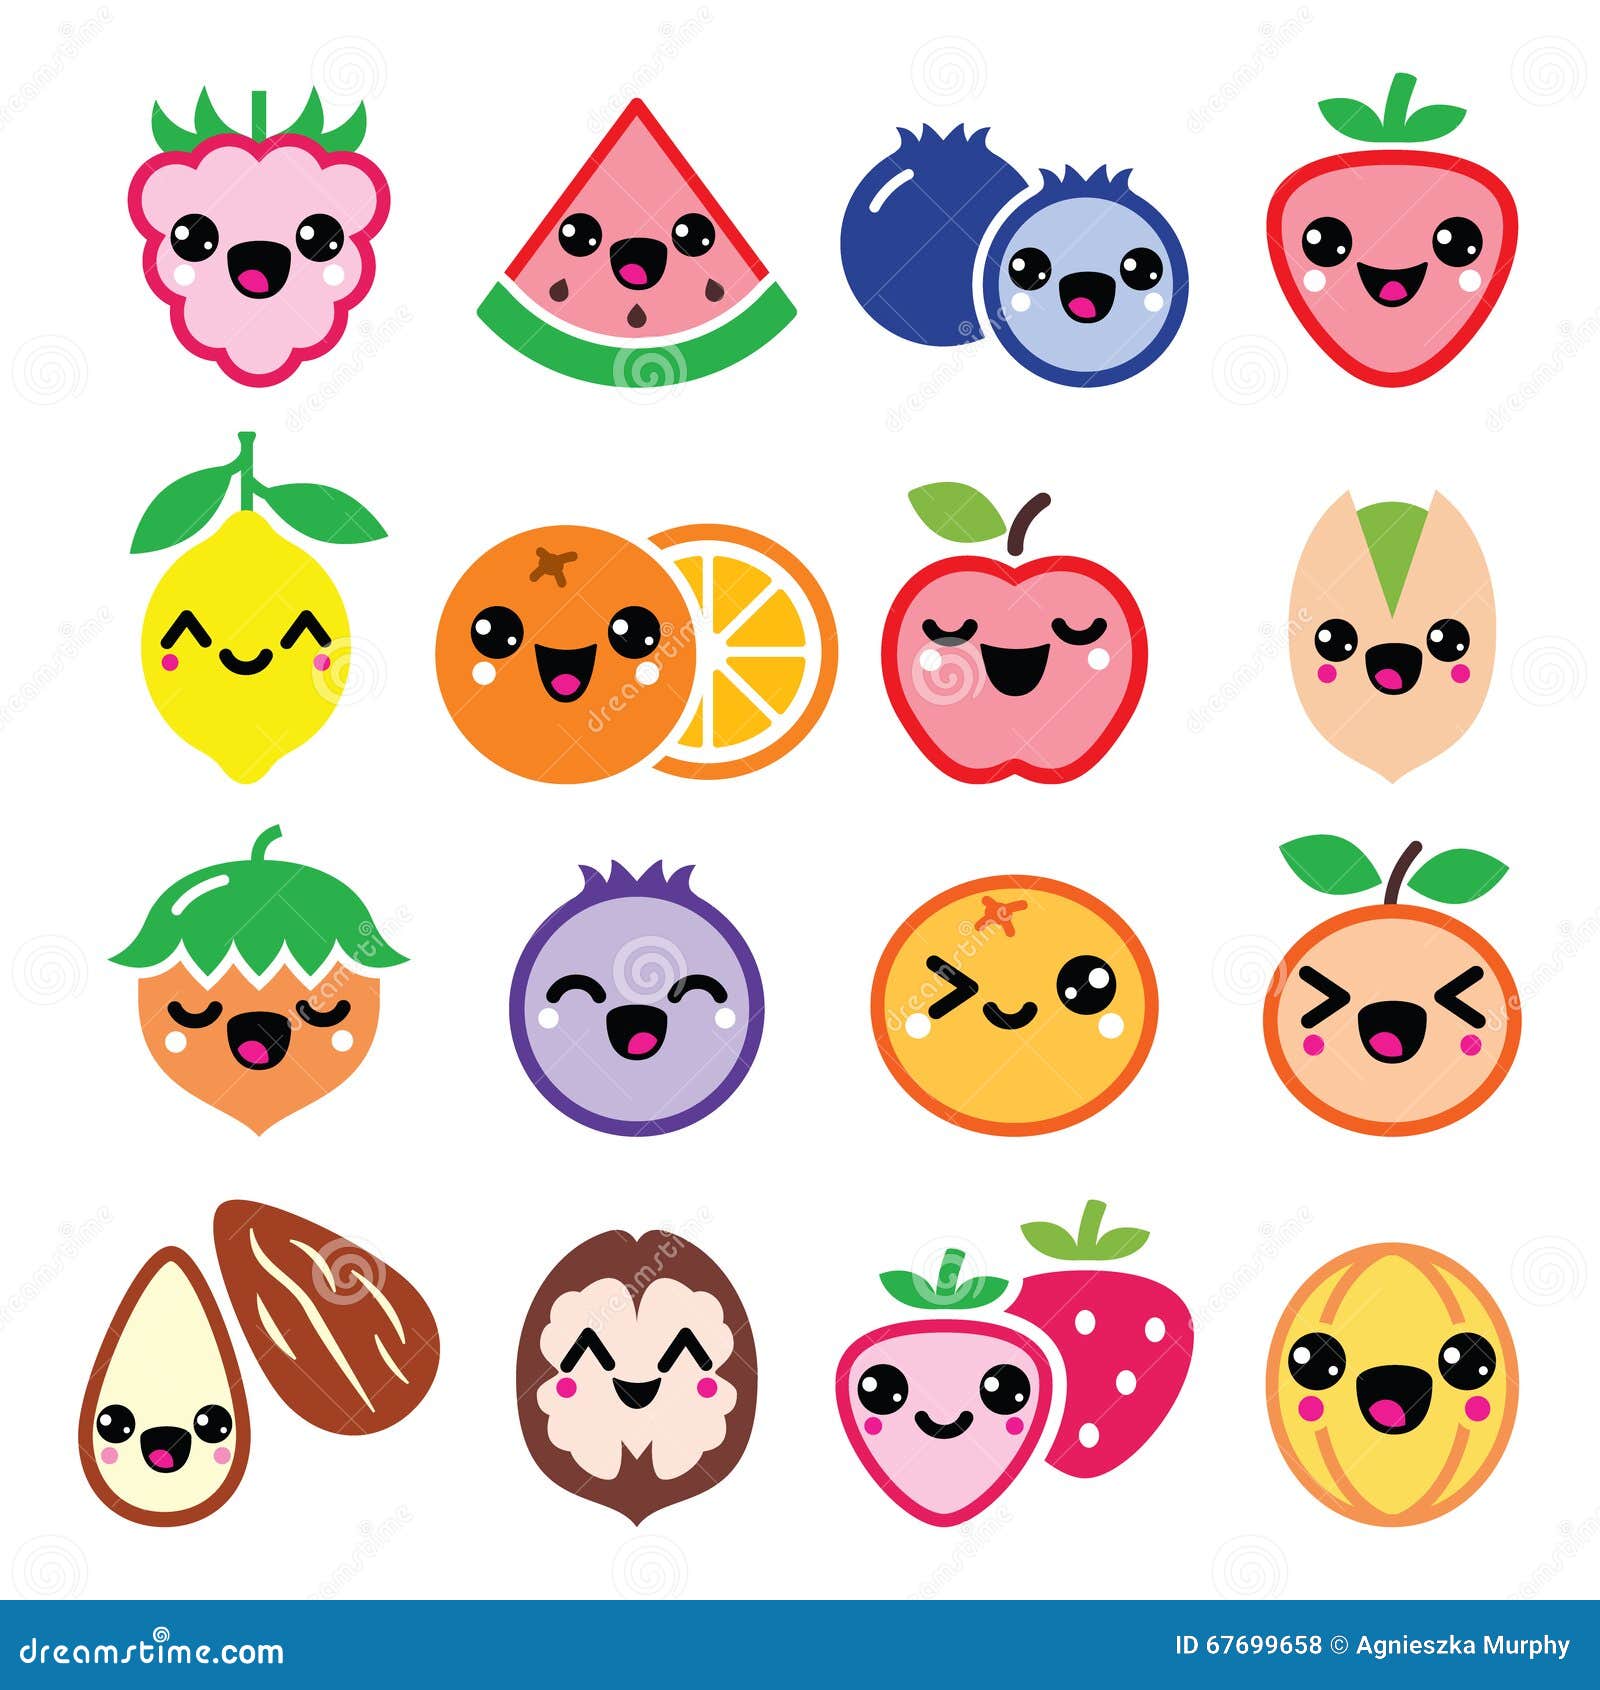 Kawaii Fruit And Nuts Cute Characters Design Stock Vector ...